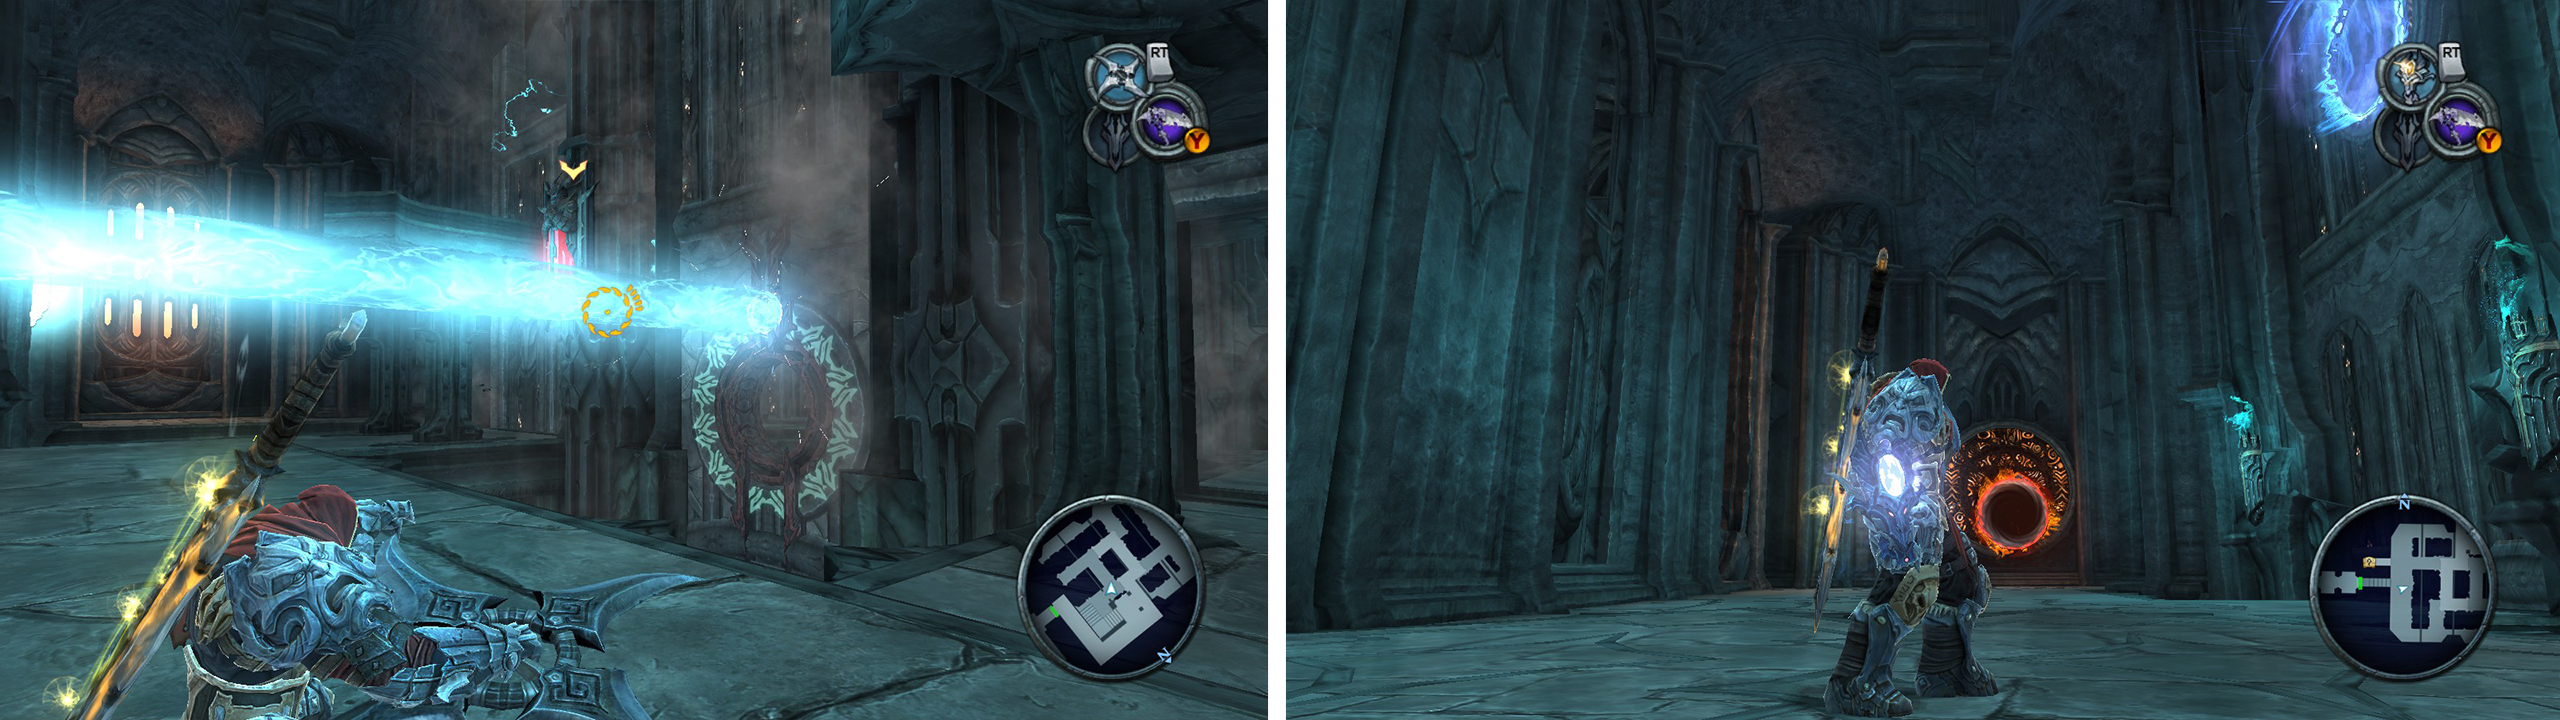 Use the portal pads to re-direct the beam (left). The spherical crystals (right) will store the beam when active.